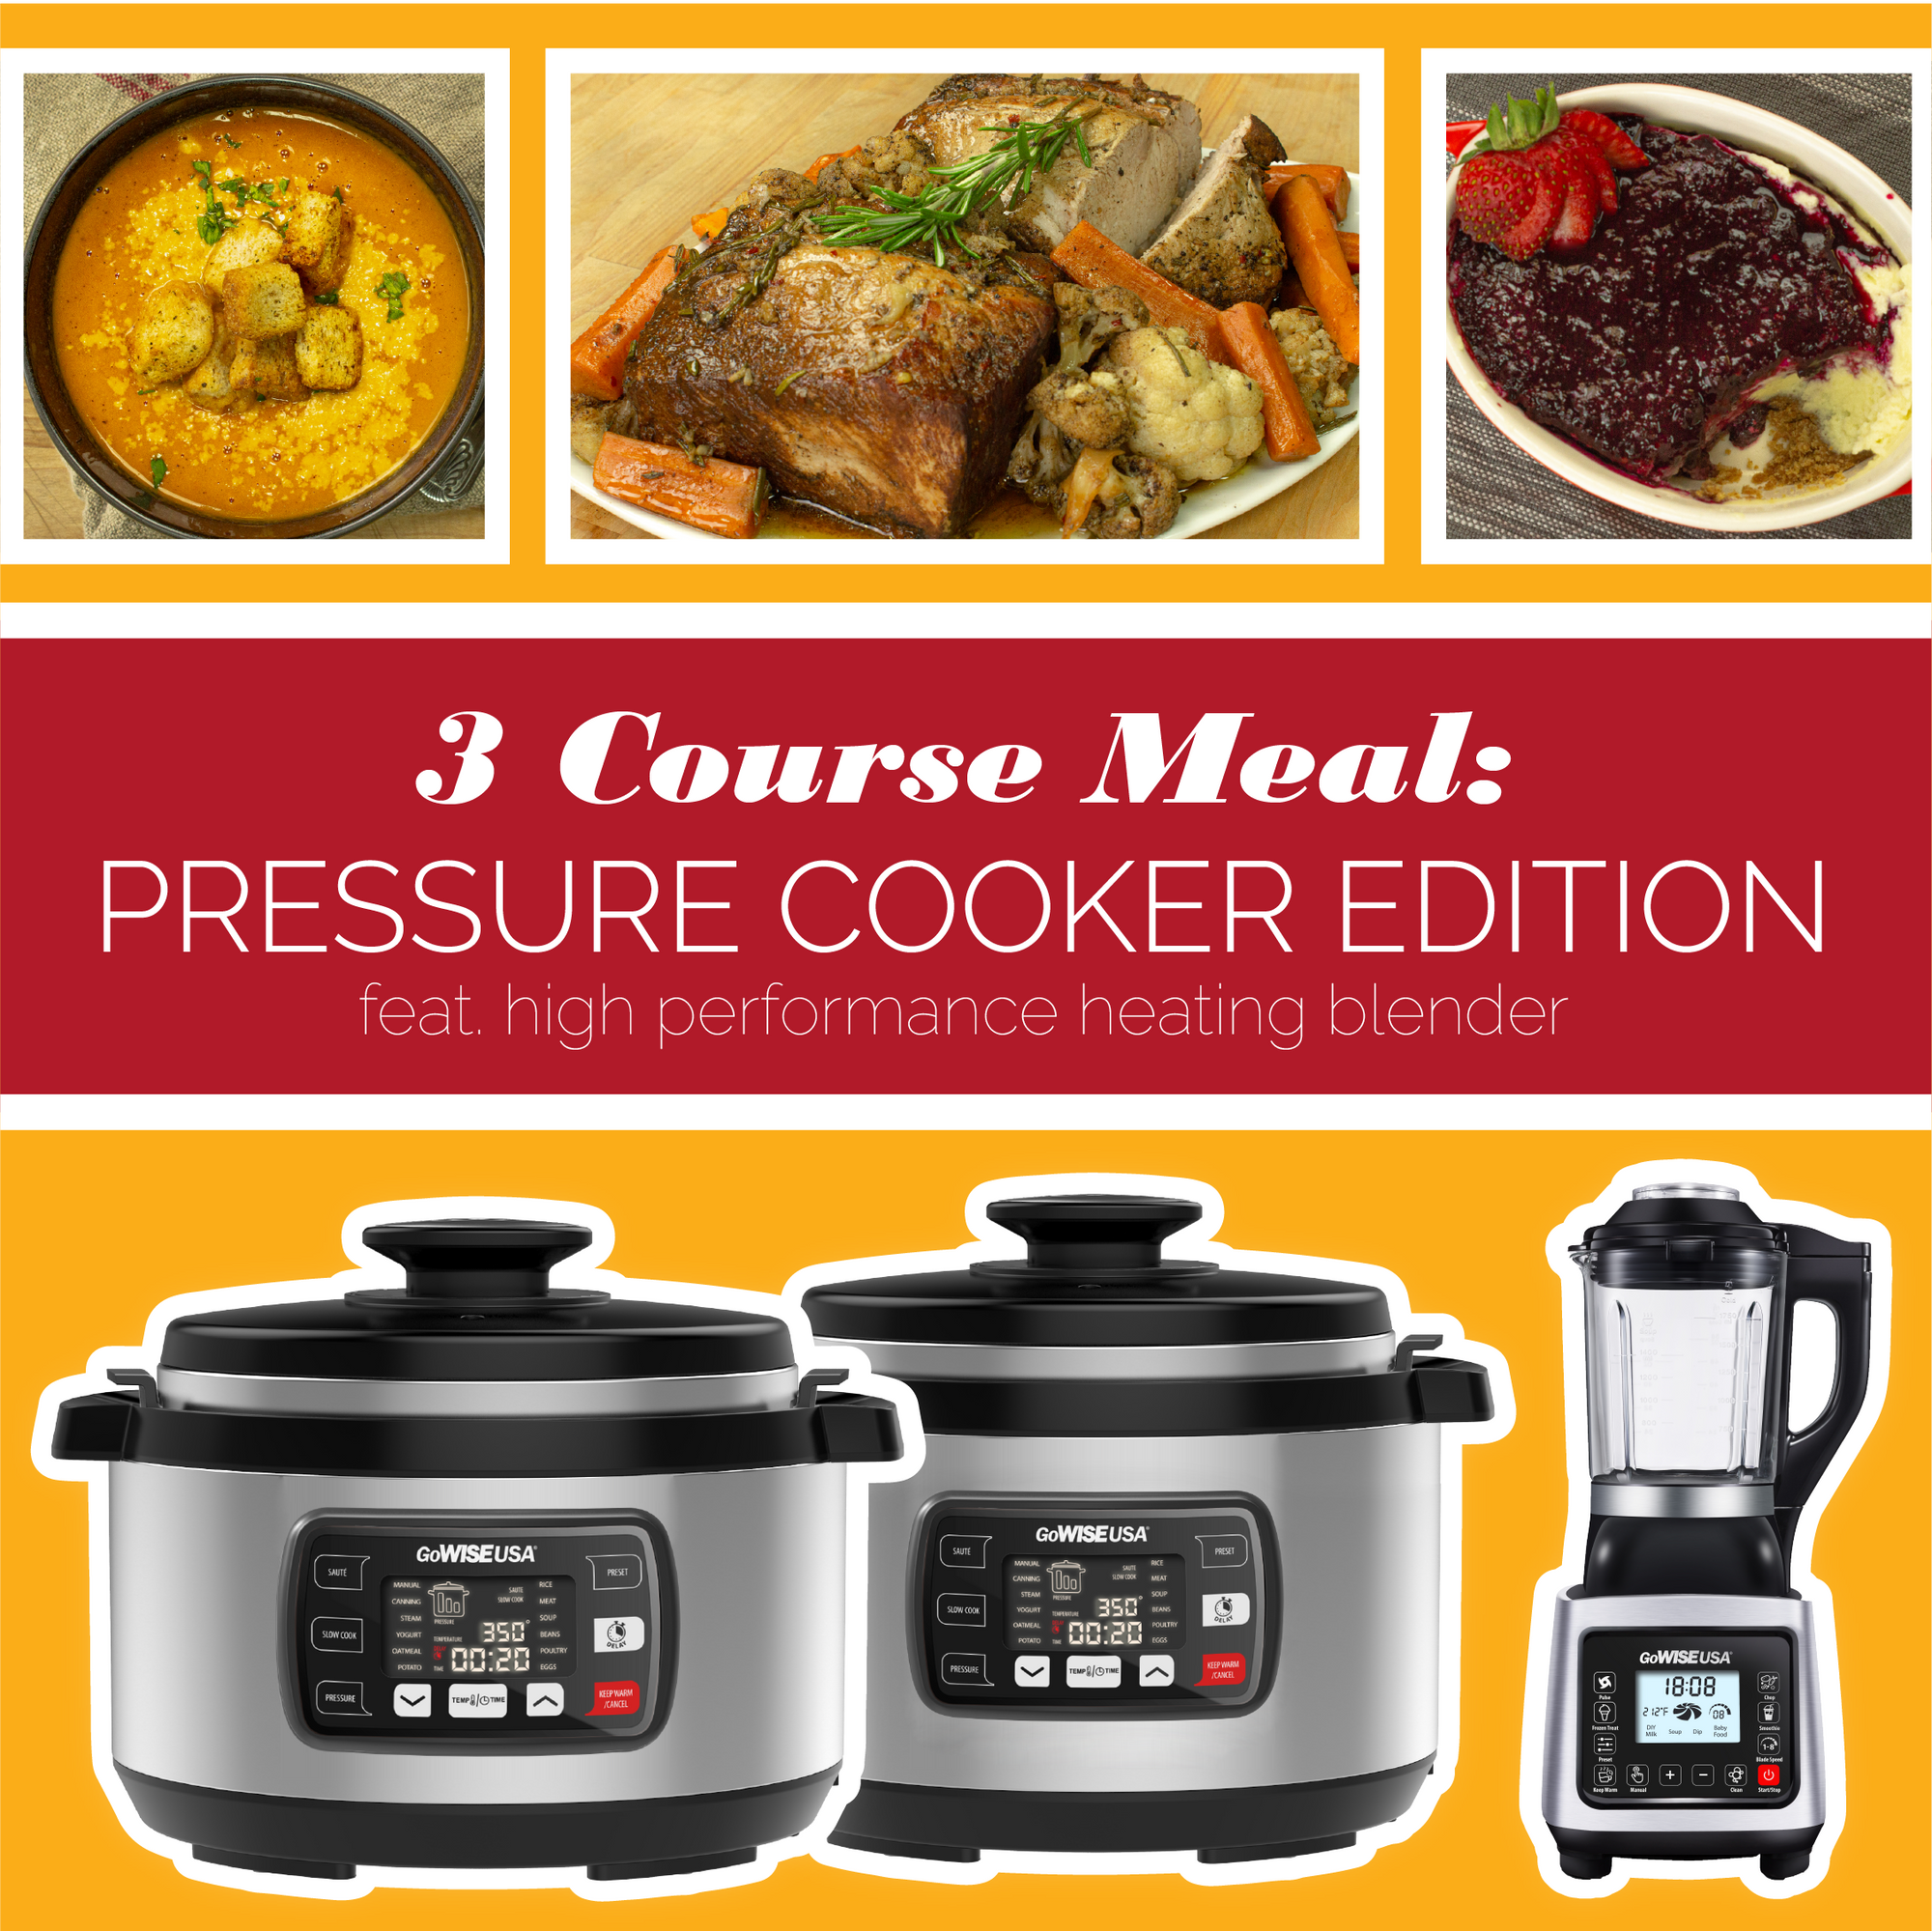 3 Course Meal: Pressure Cooker Edition